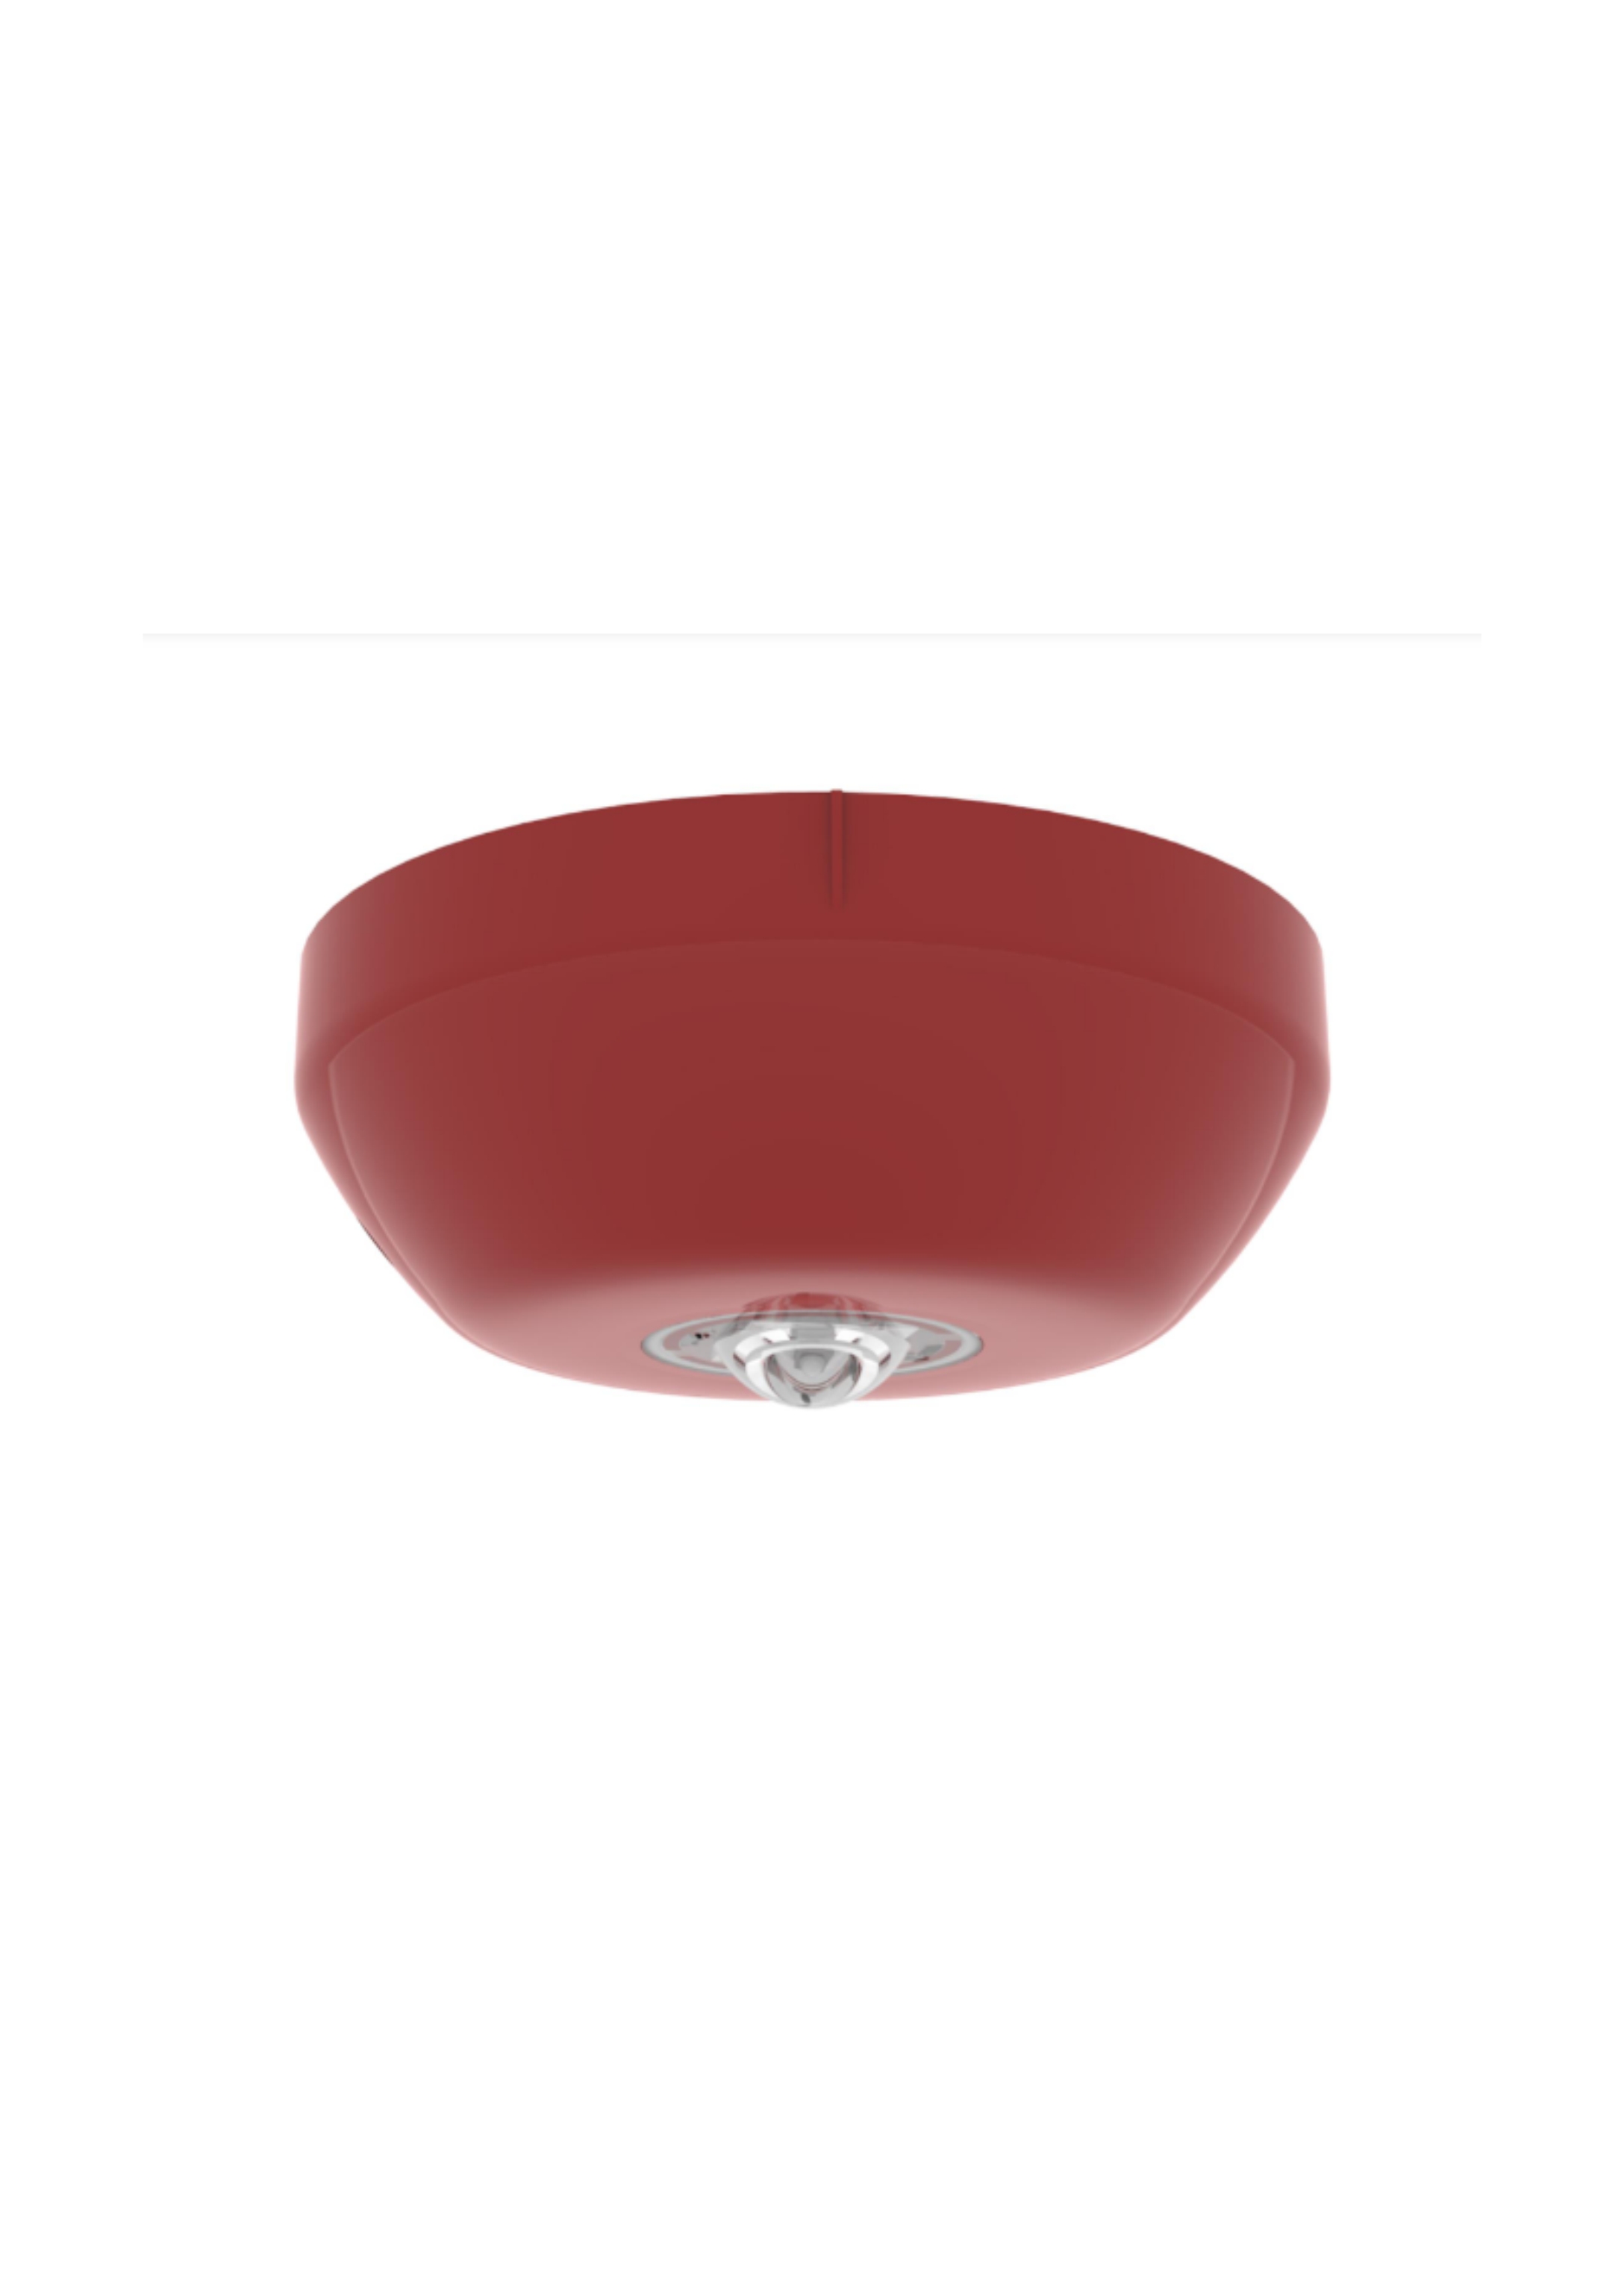 Ceiling Beacon - Red case, white LEDs (7.5m) 14601...